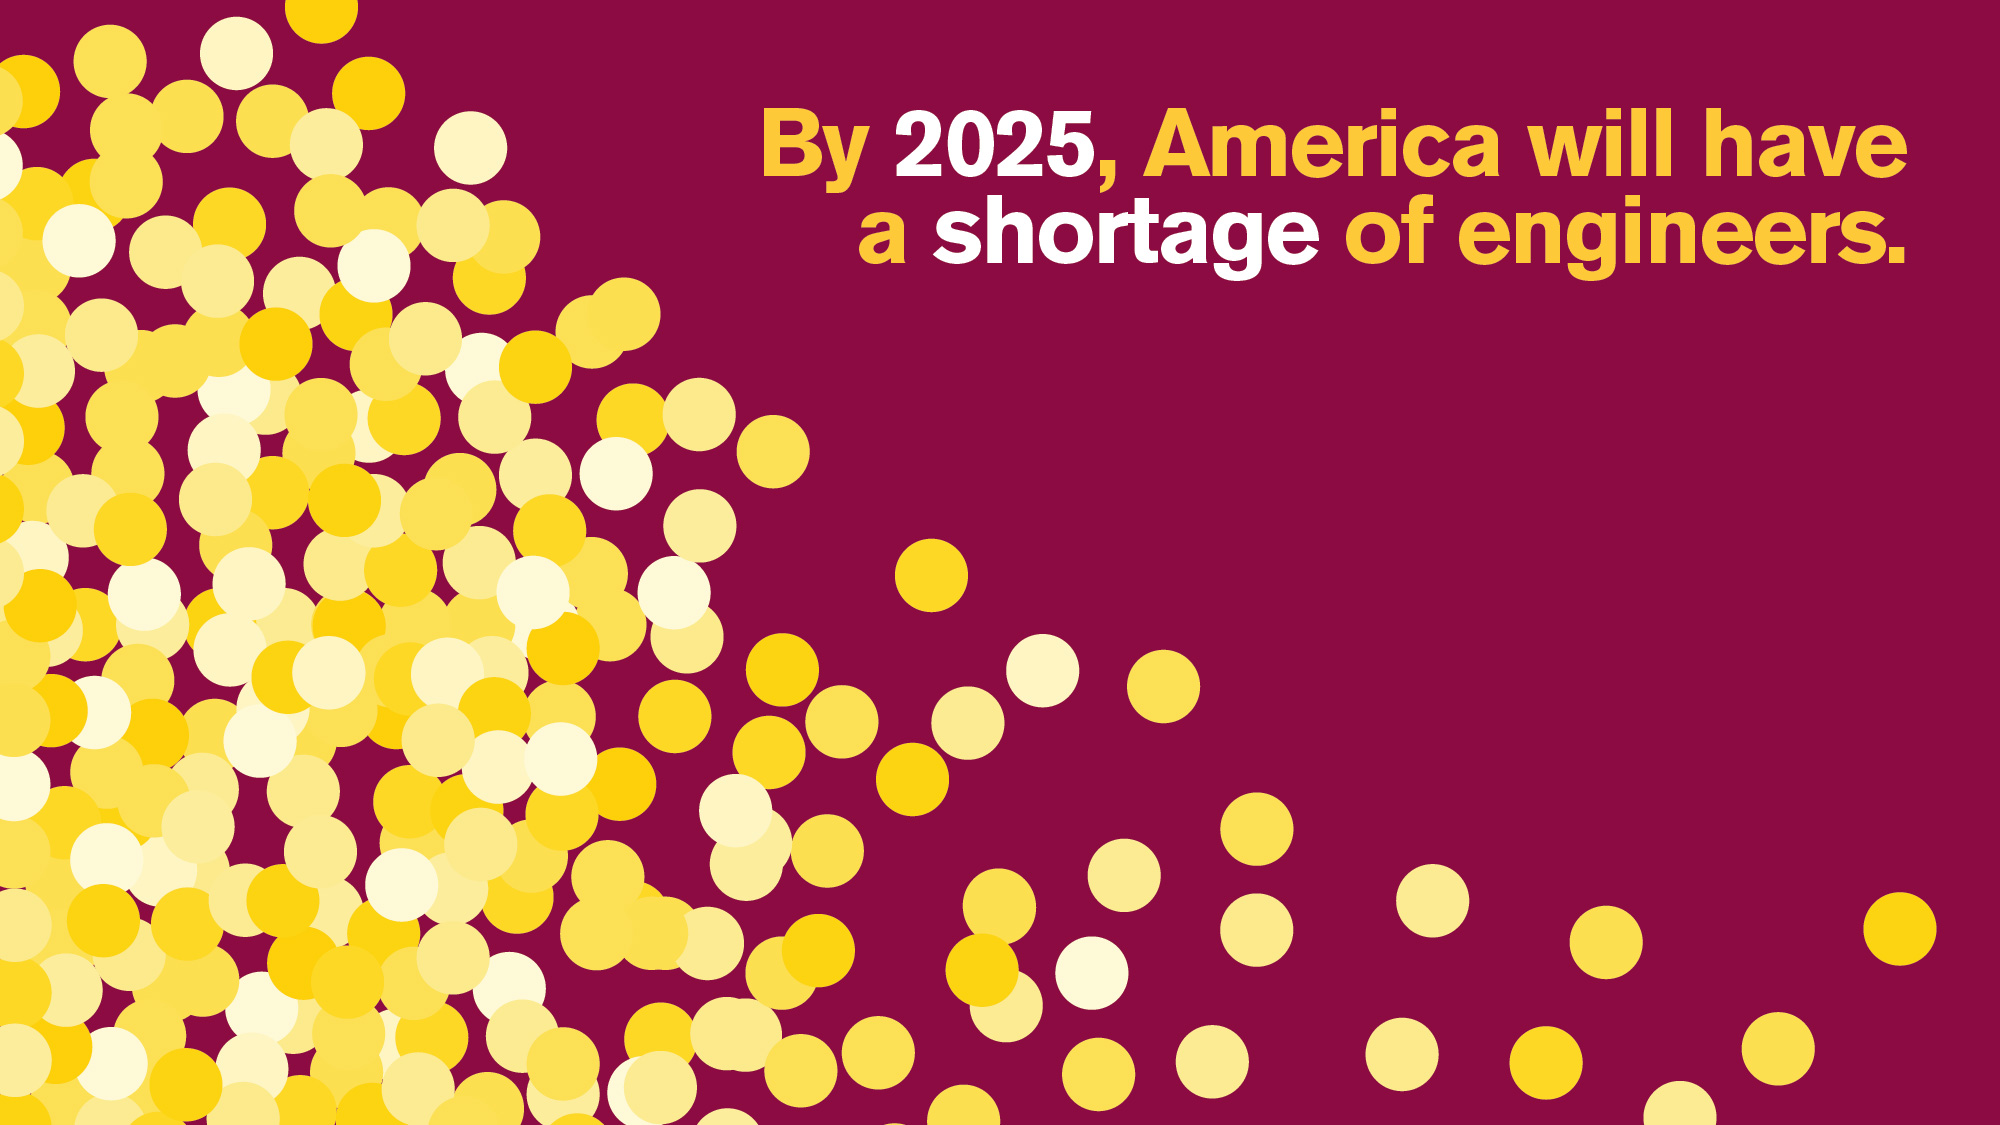 By 2025, America will have a shortage of engineers